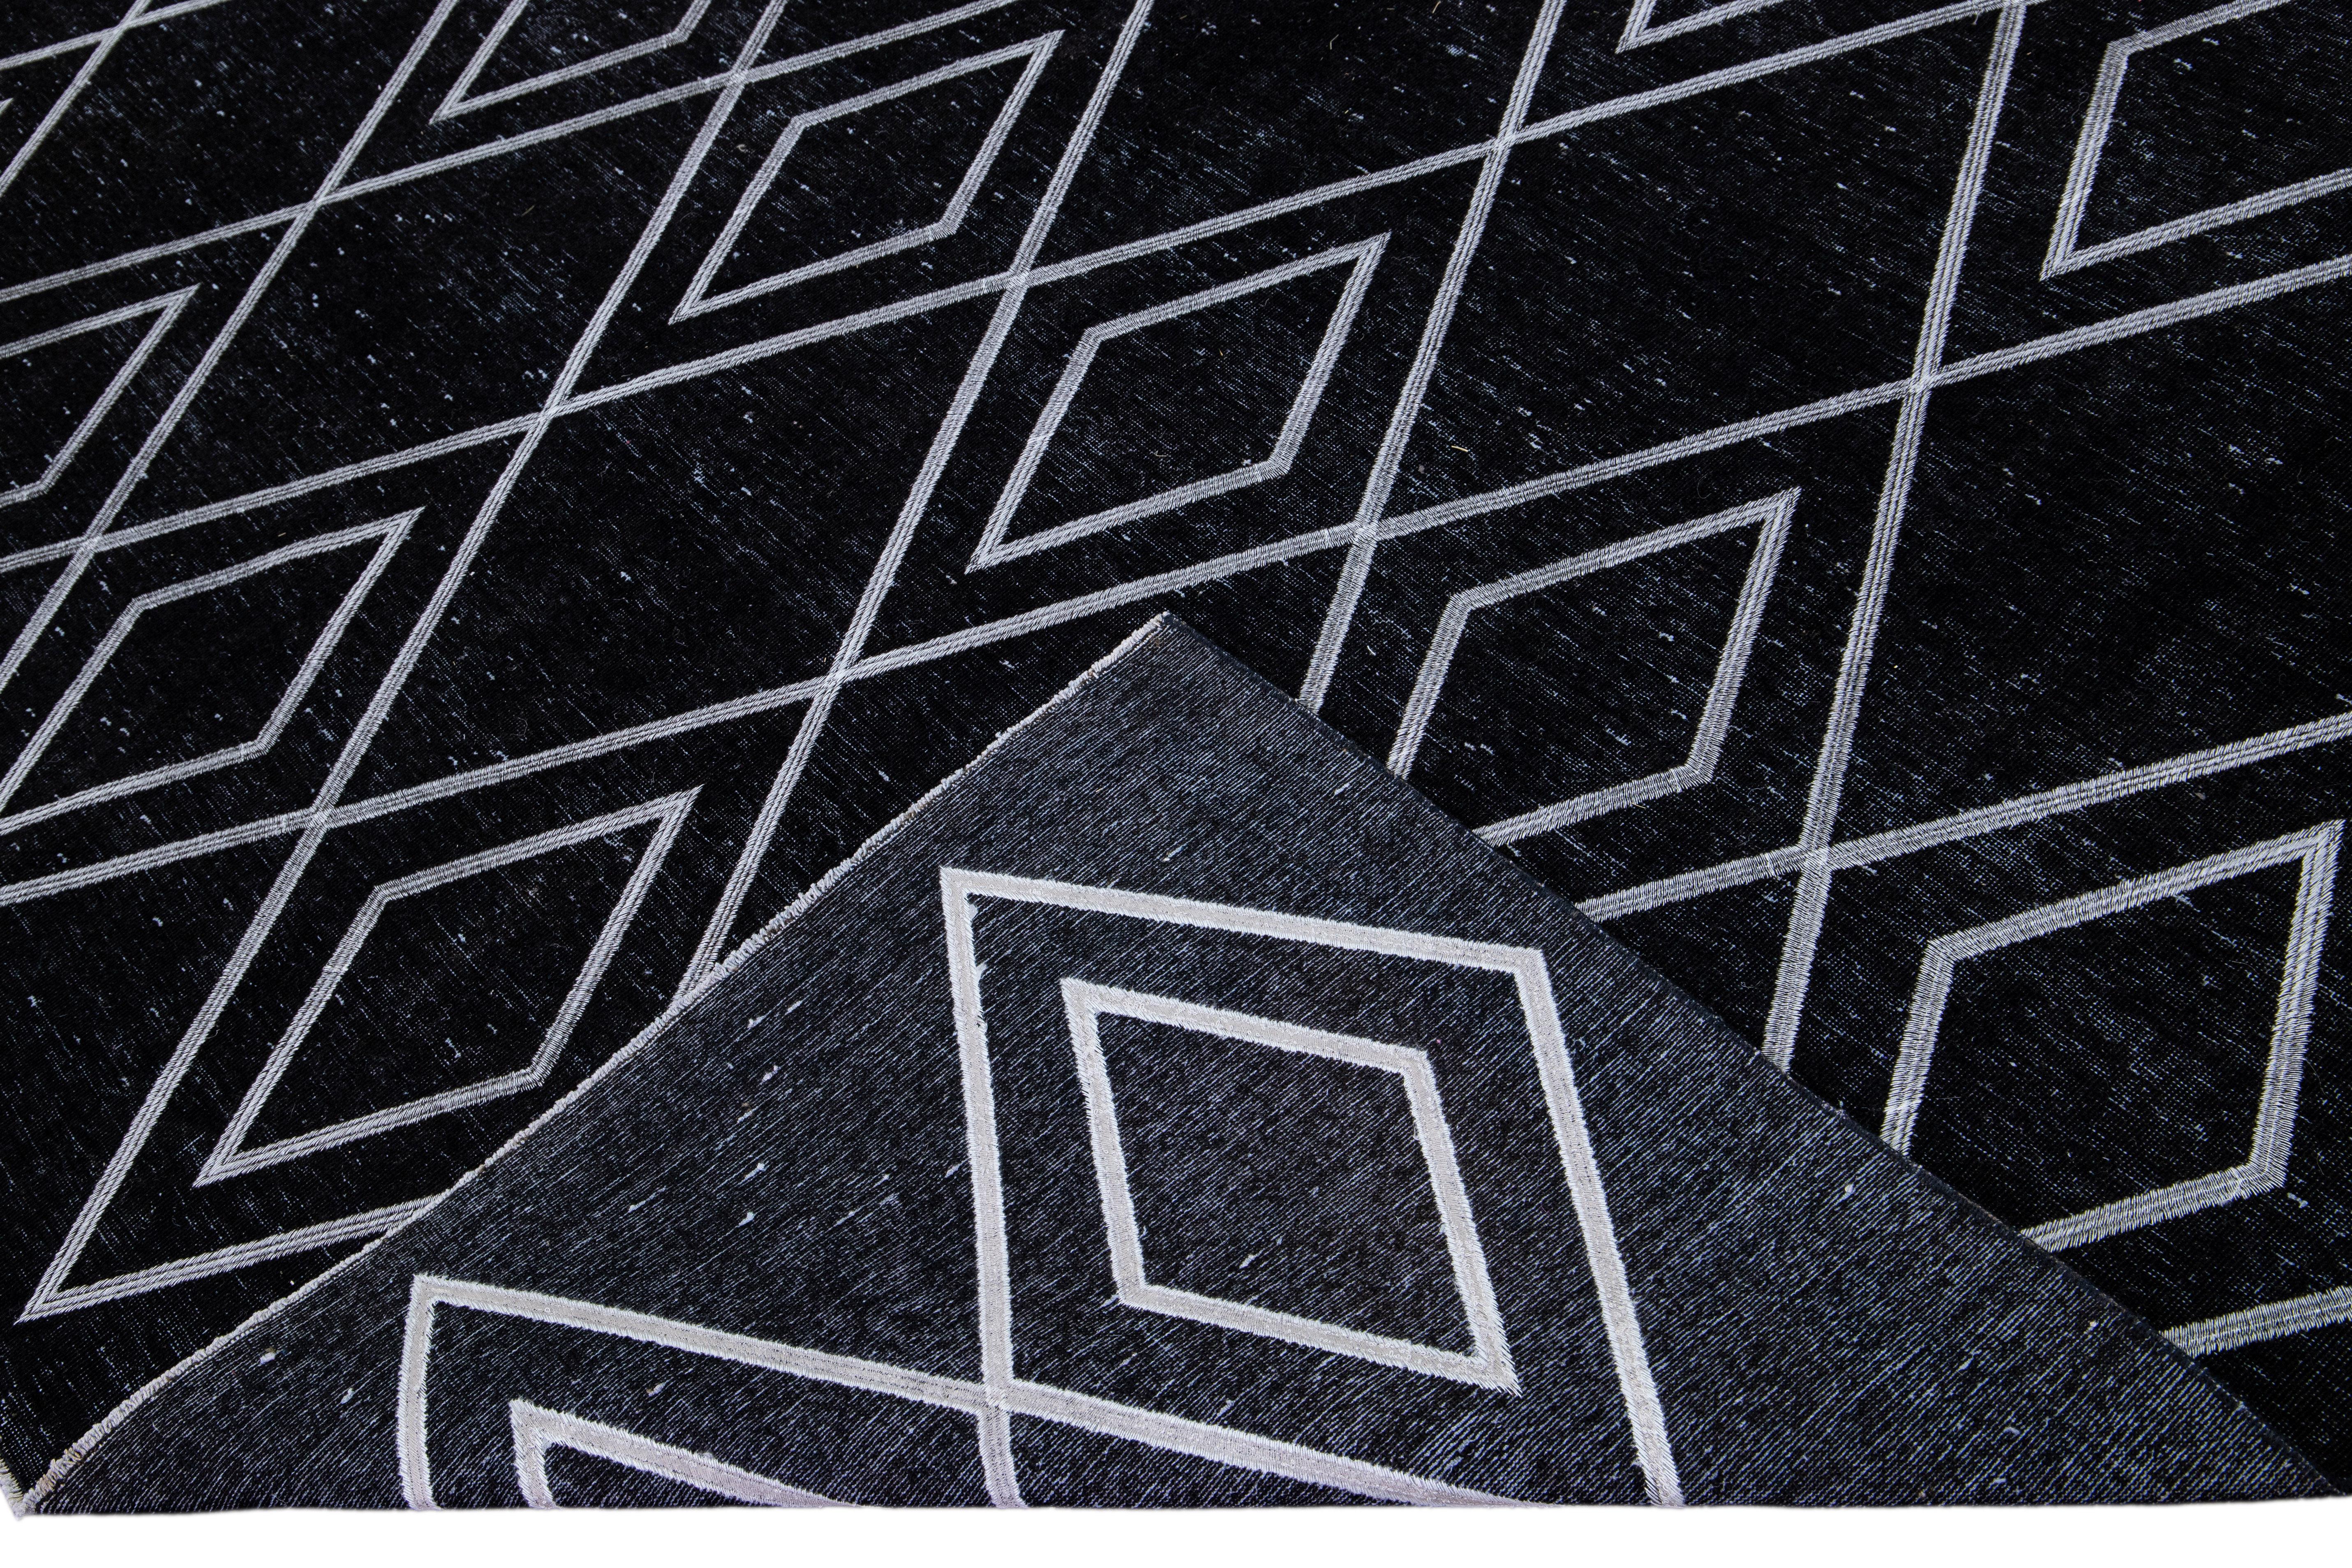 Beautiful Turkish handmade wool rug with a black distress look field. This Modern rug has white accents featuring a gorgeous all-over geometric diamond pattern design.

This rug measures: 9'3